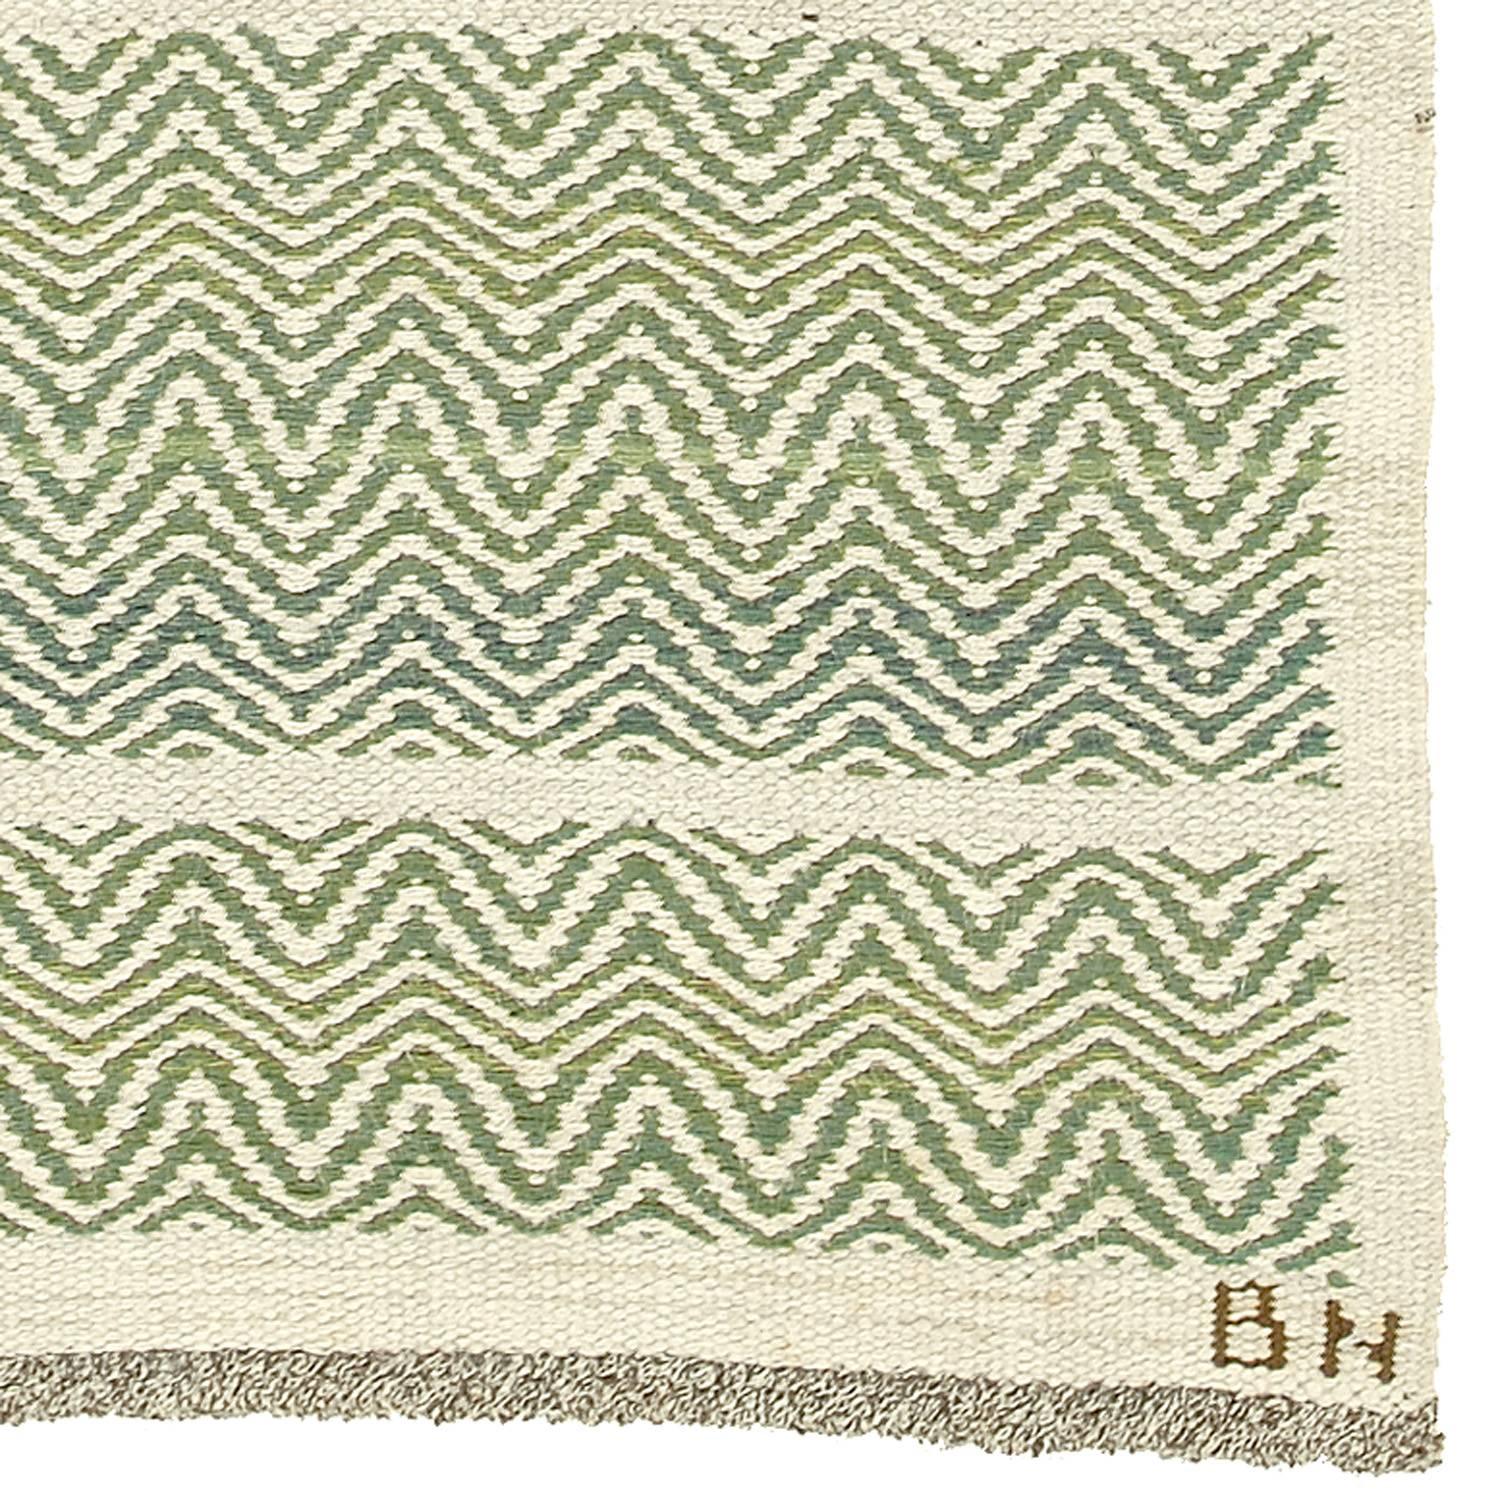 Hand-Woven Mid-20th Century Swedish Flat-Weave Carpet by Barbro Nilsson For Sale